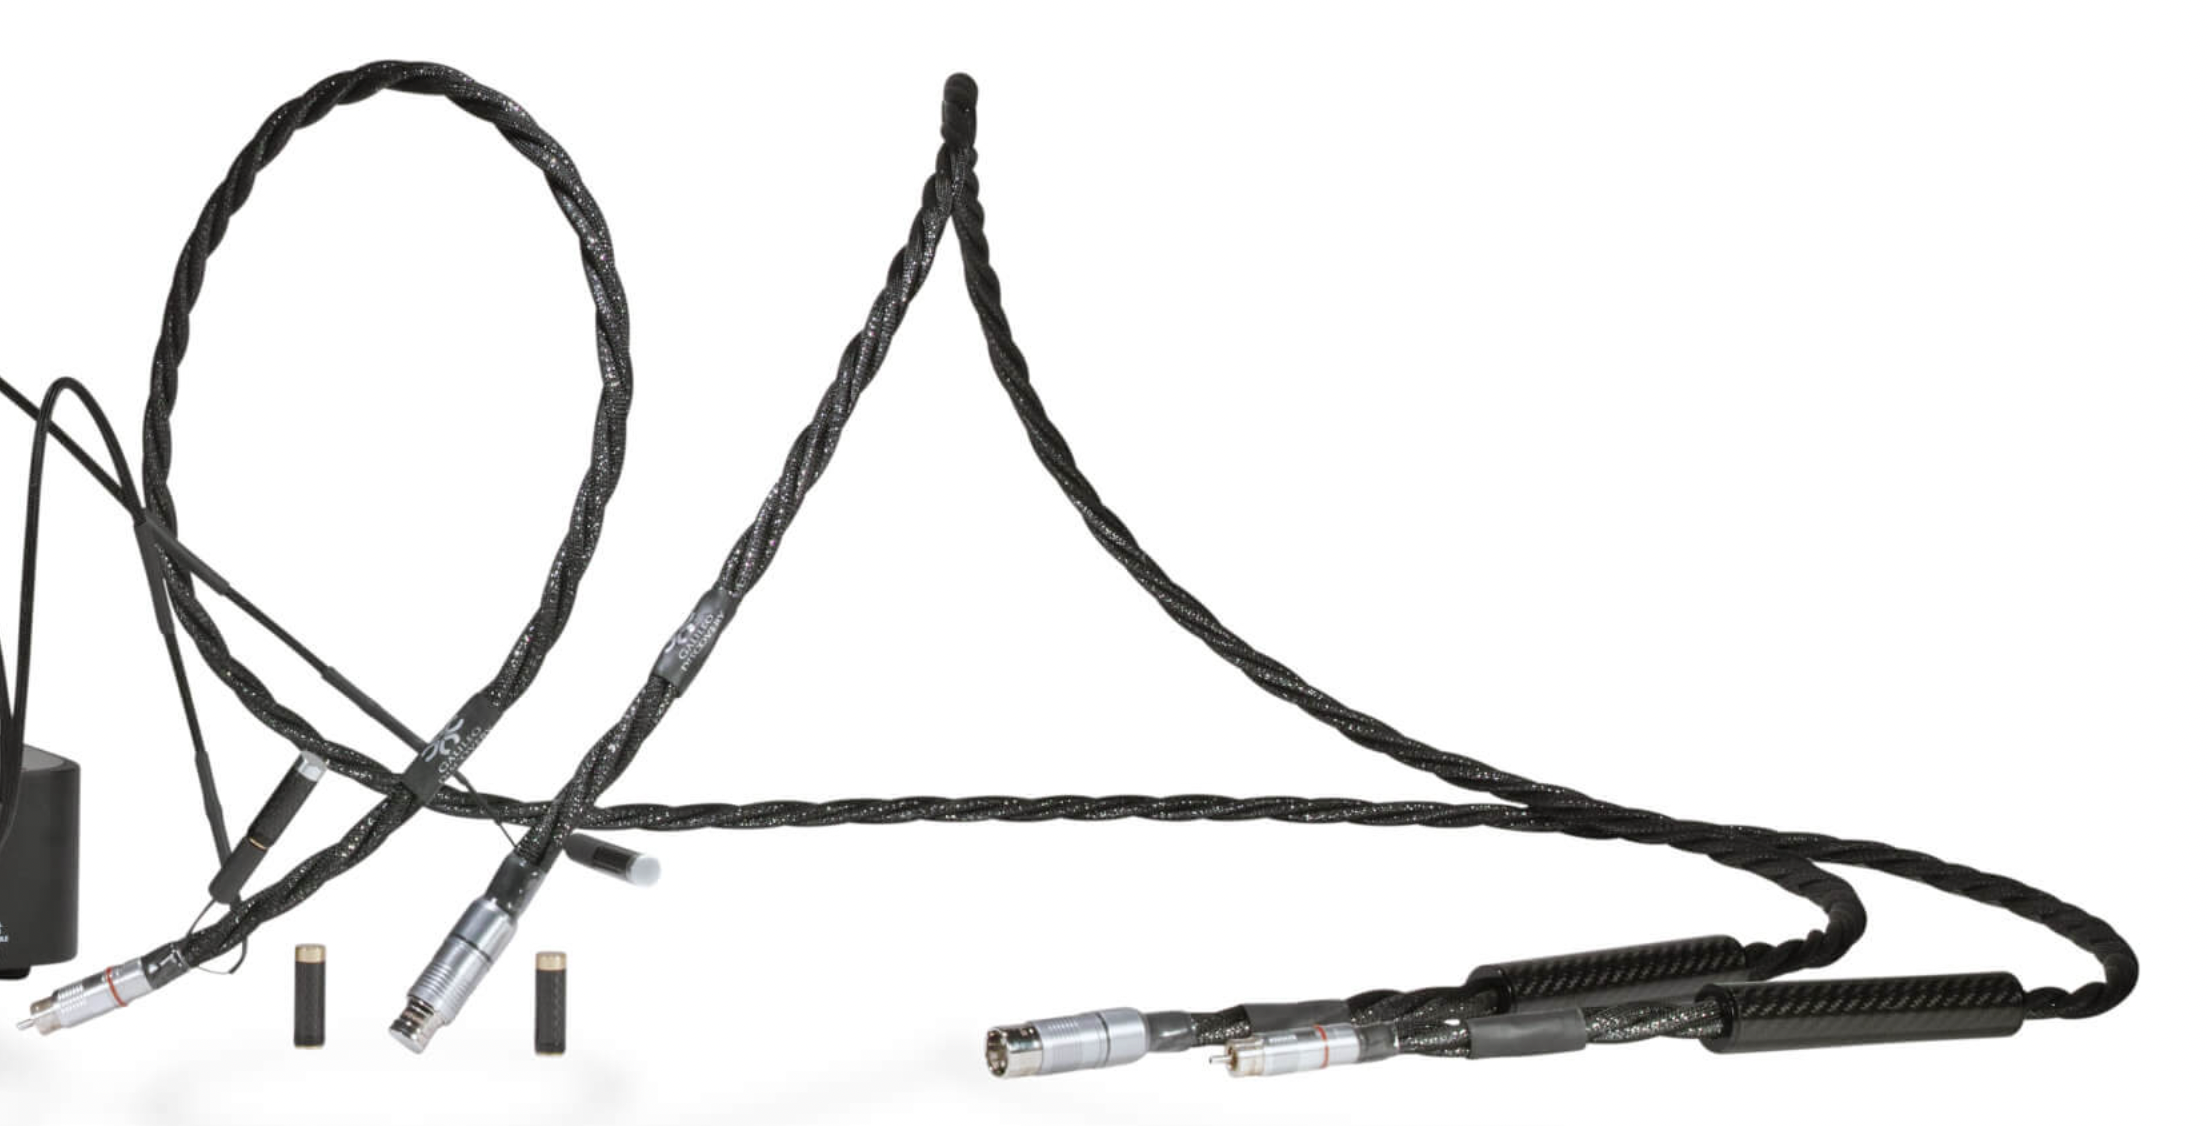 GALILEO DISCOVERY INTERCONNECT CABLE